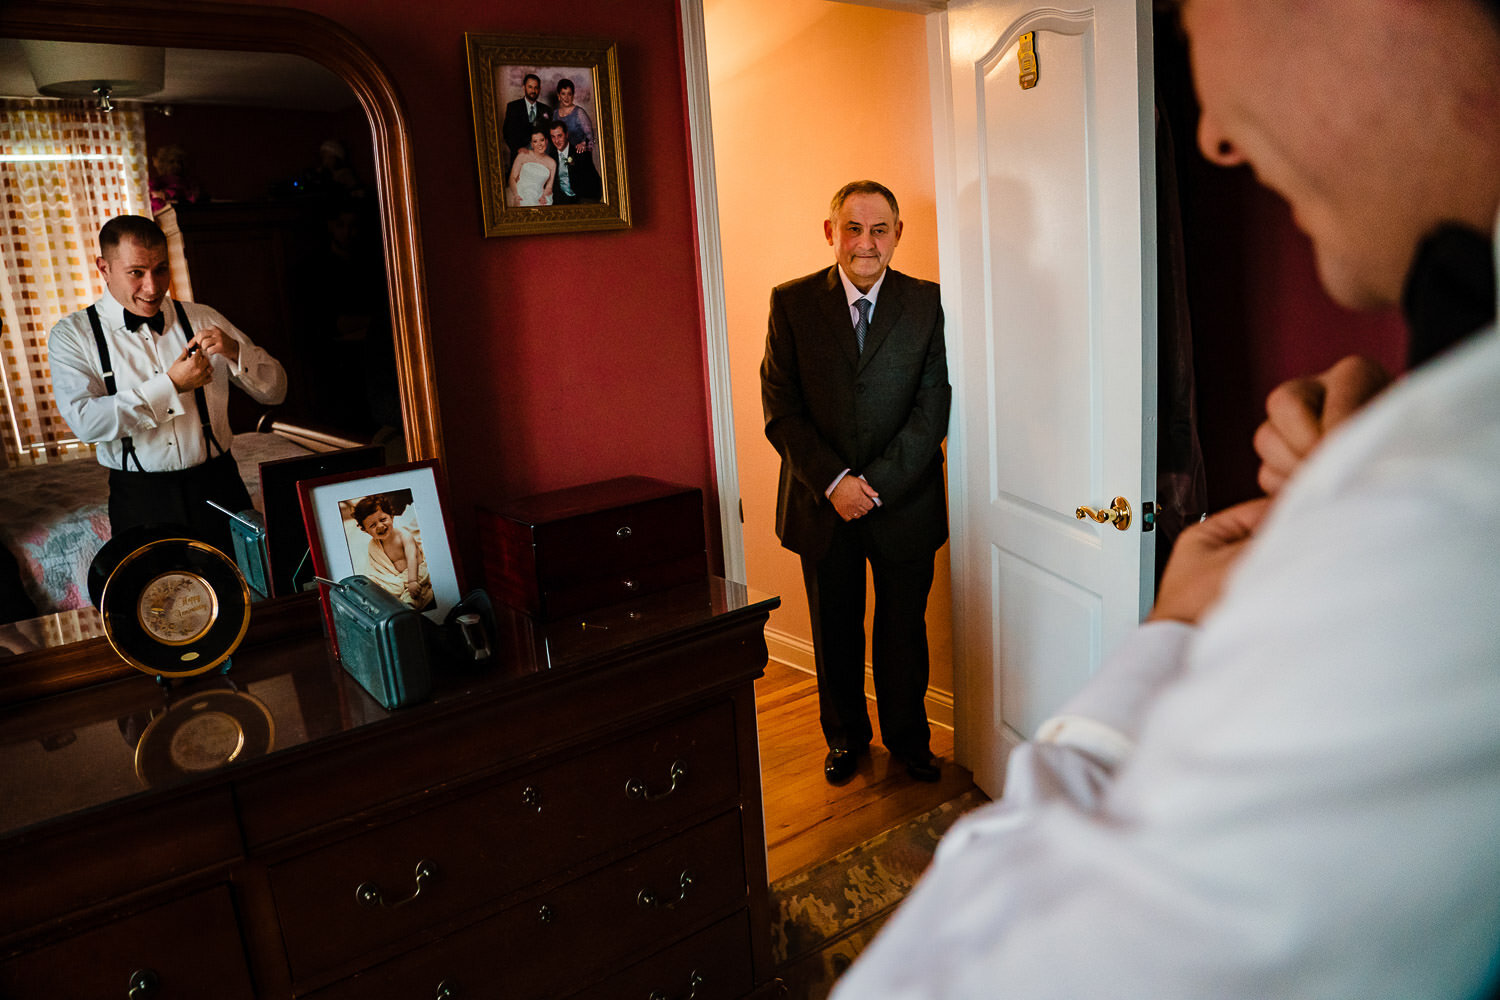 Groom's father looks as his son puts on a tie in front of a mirror